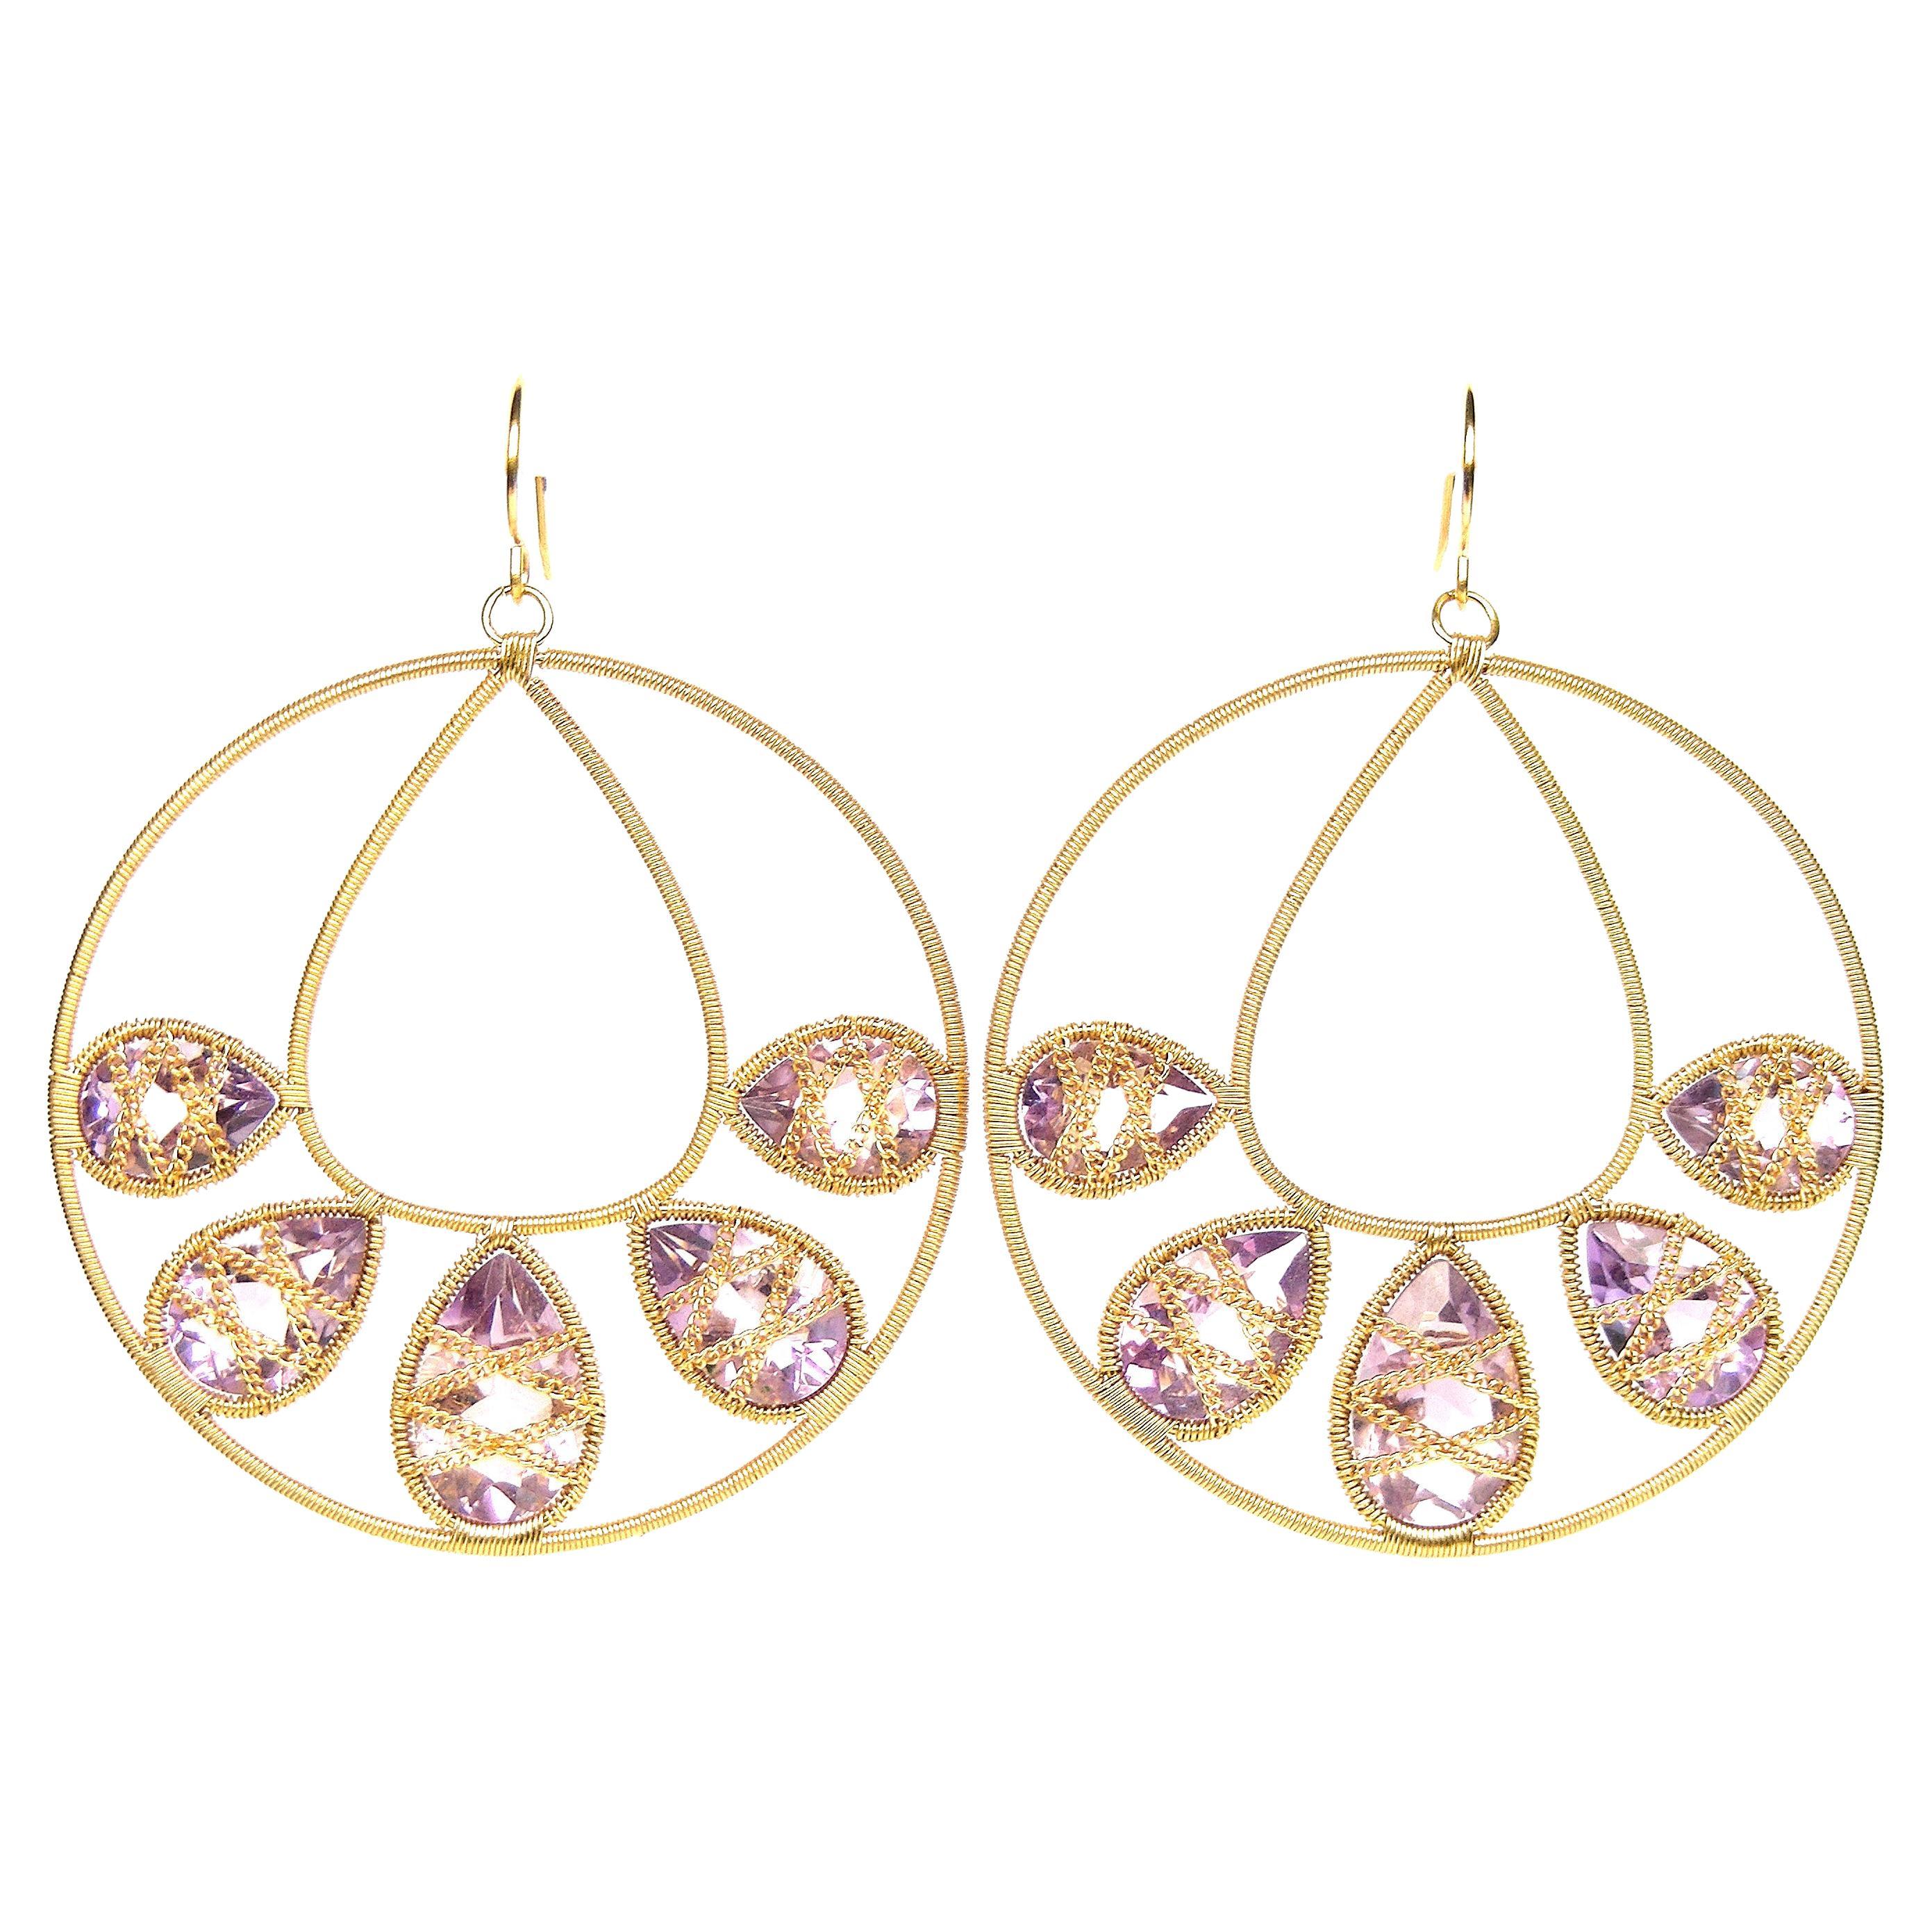 Hoop 18k Yellow Gold Mandala Earrings with 4 smoked quartz motifs 
Summer Splash is a collection of easy to wear, fashion oriented hoop earrings to wear with lightness, chic and glam only this pieces for this collection 
They come in 6 variations of